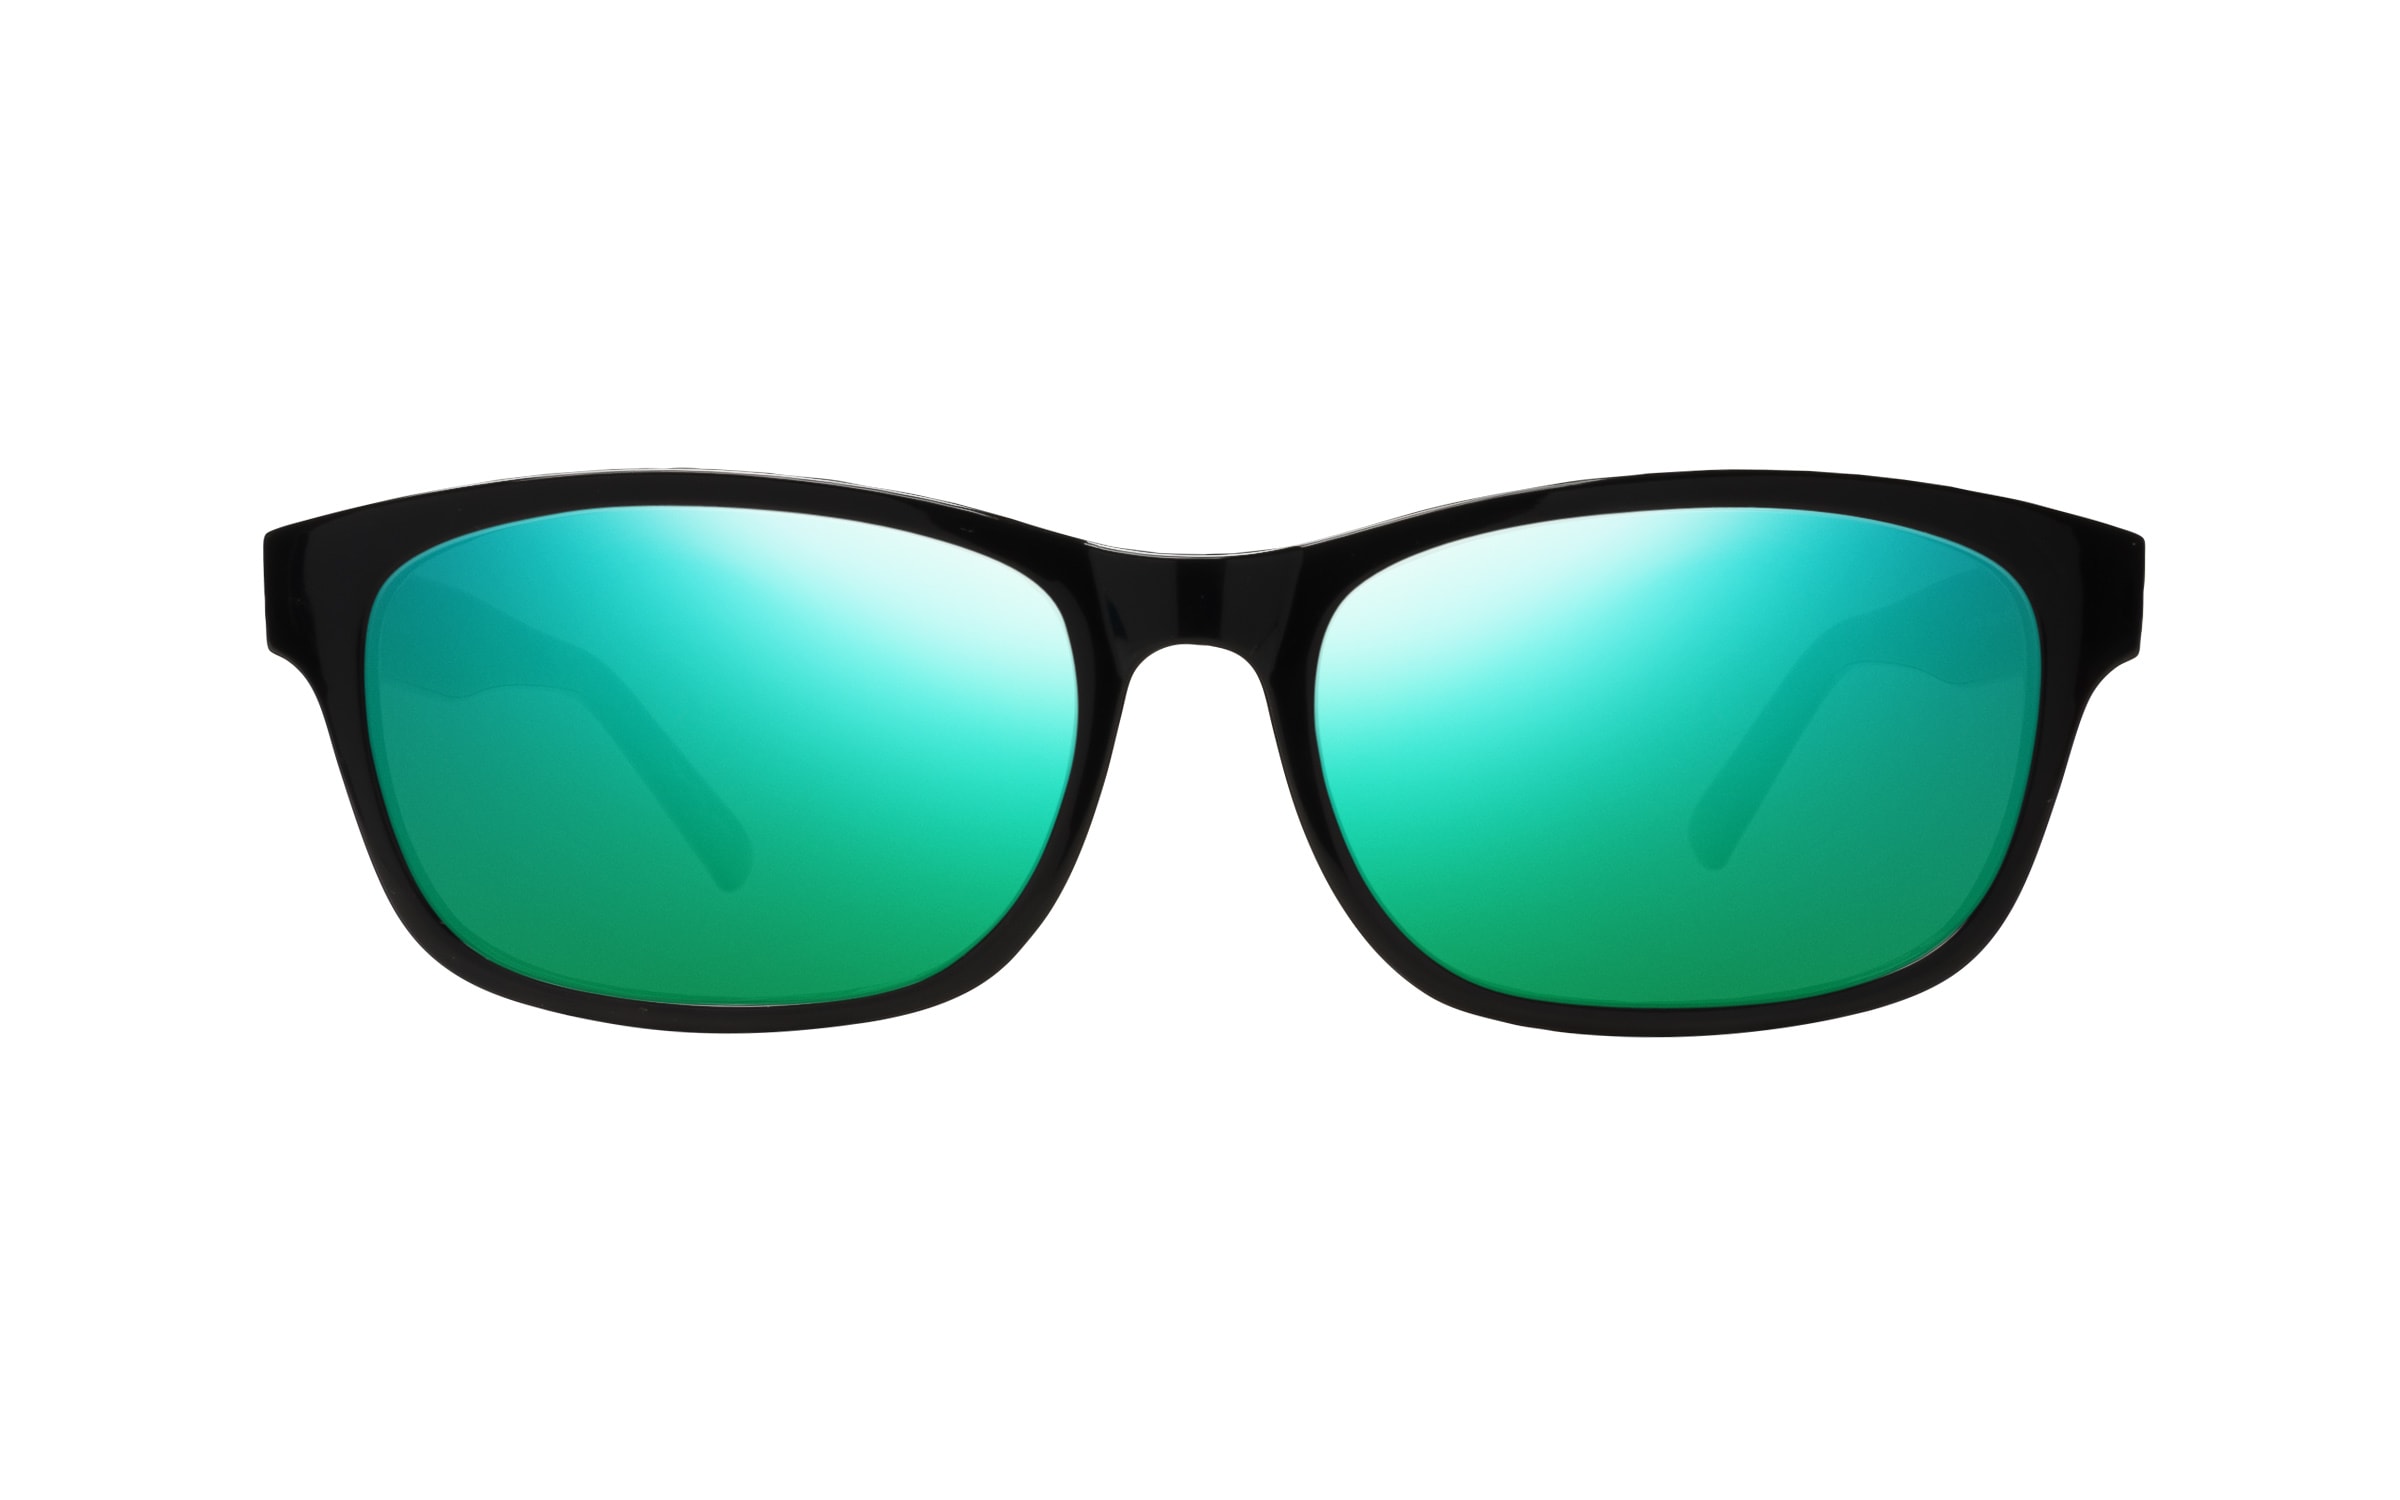 Men's Casual Classic Dark Green Polarized Sunglasses, Don't Miss These  Great Deals